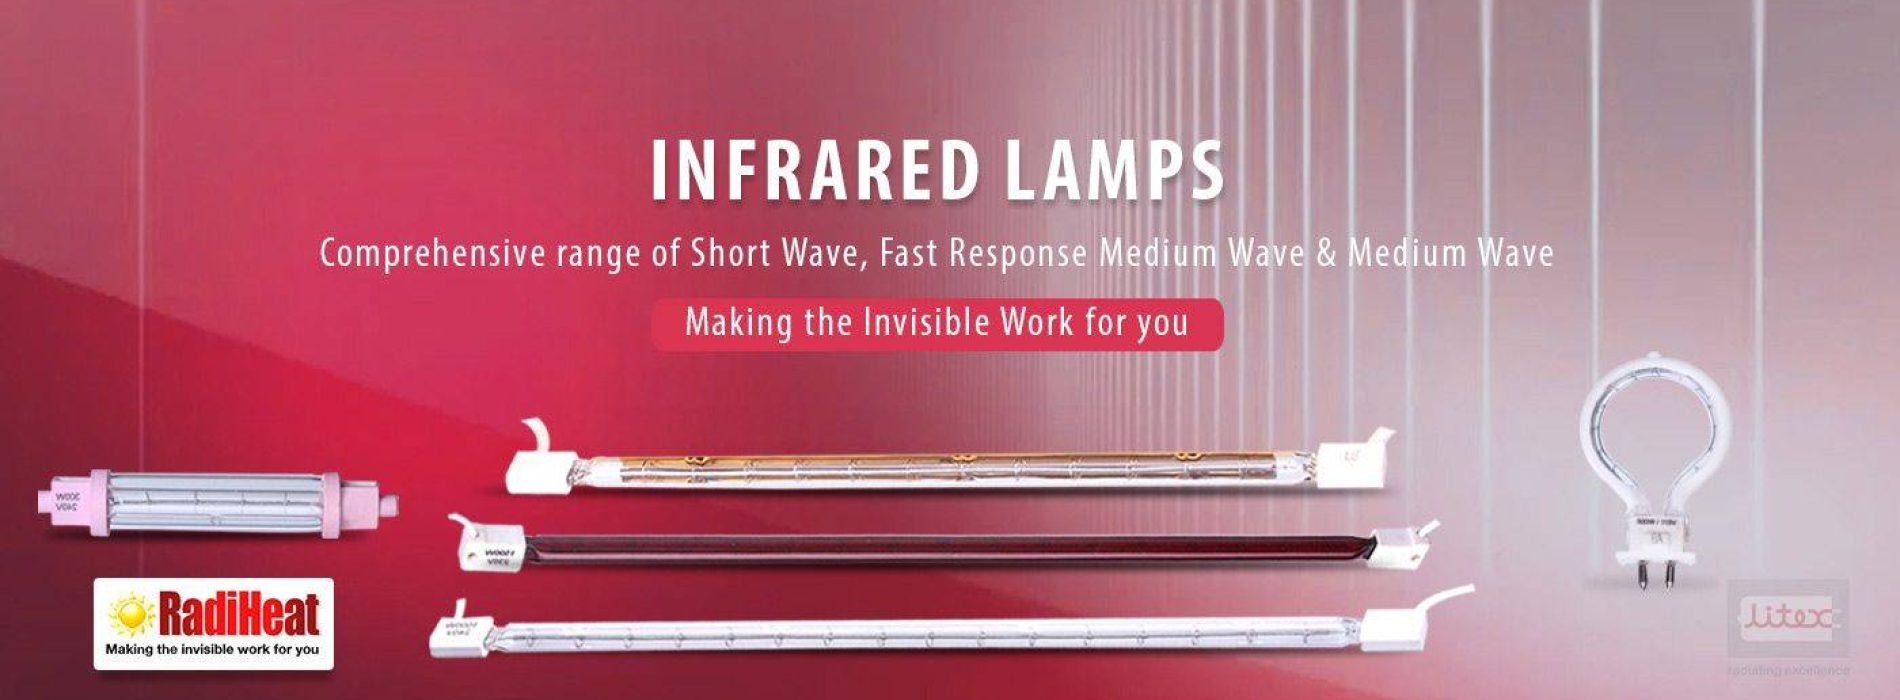 infrared lamps